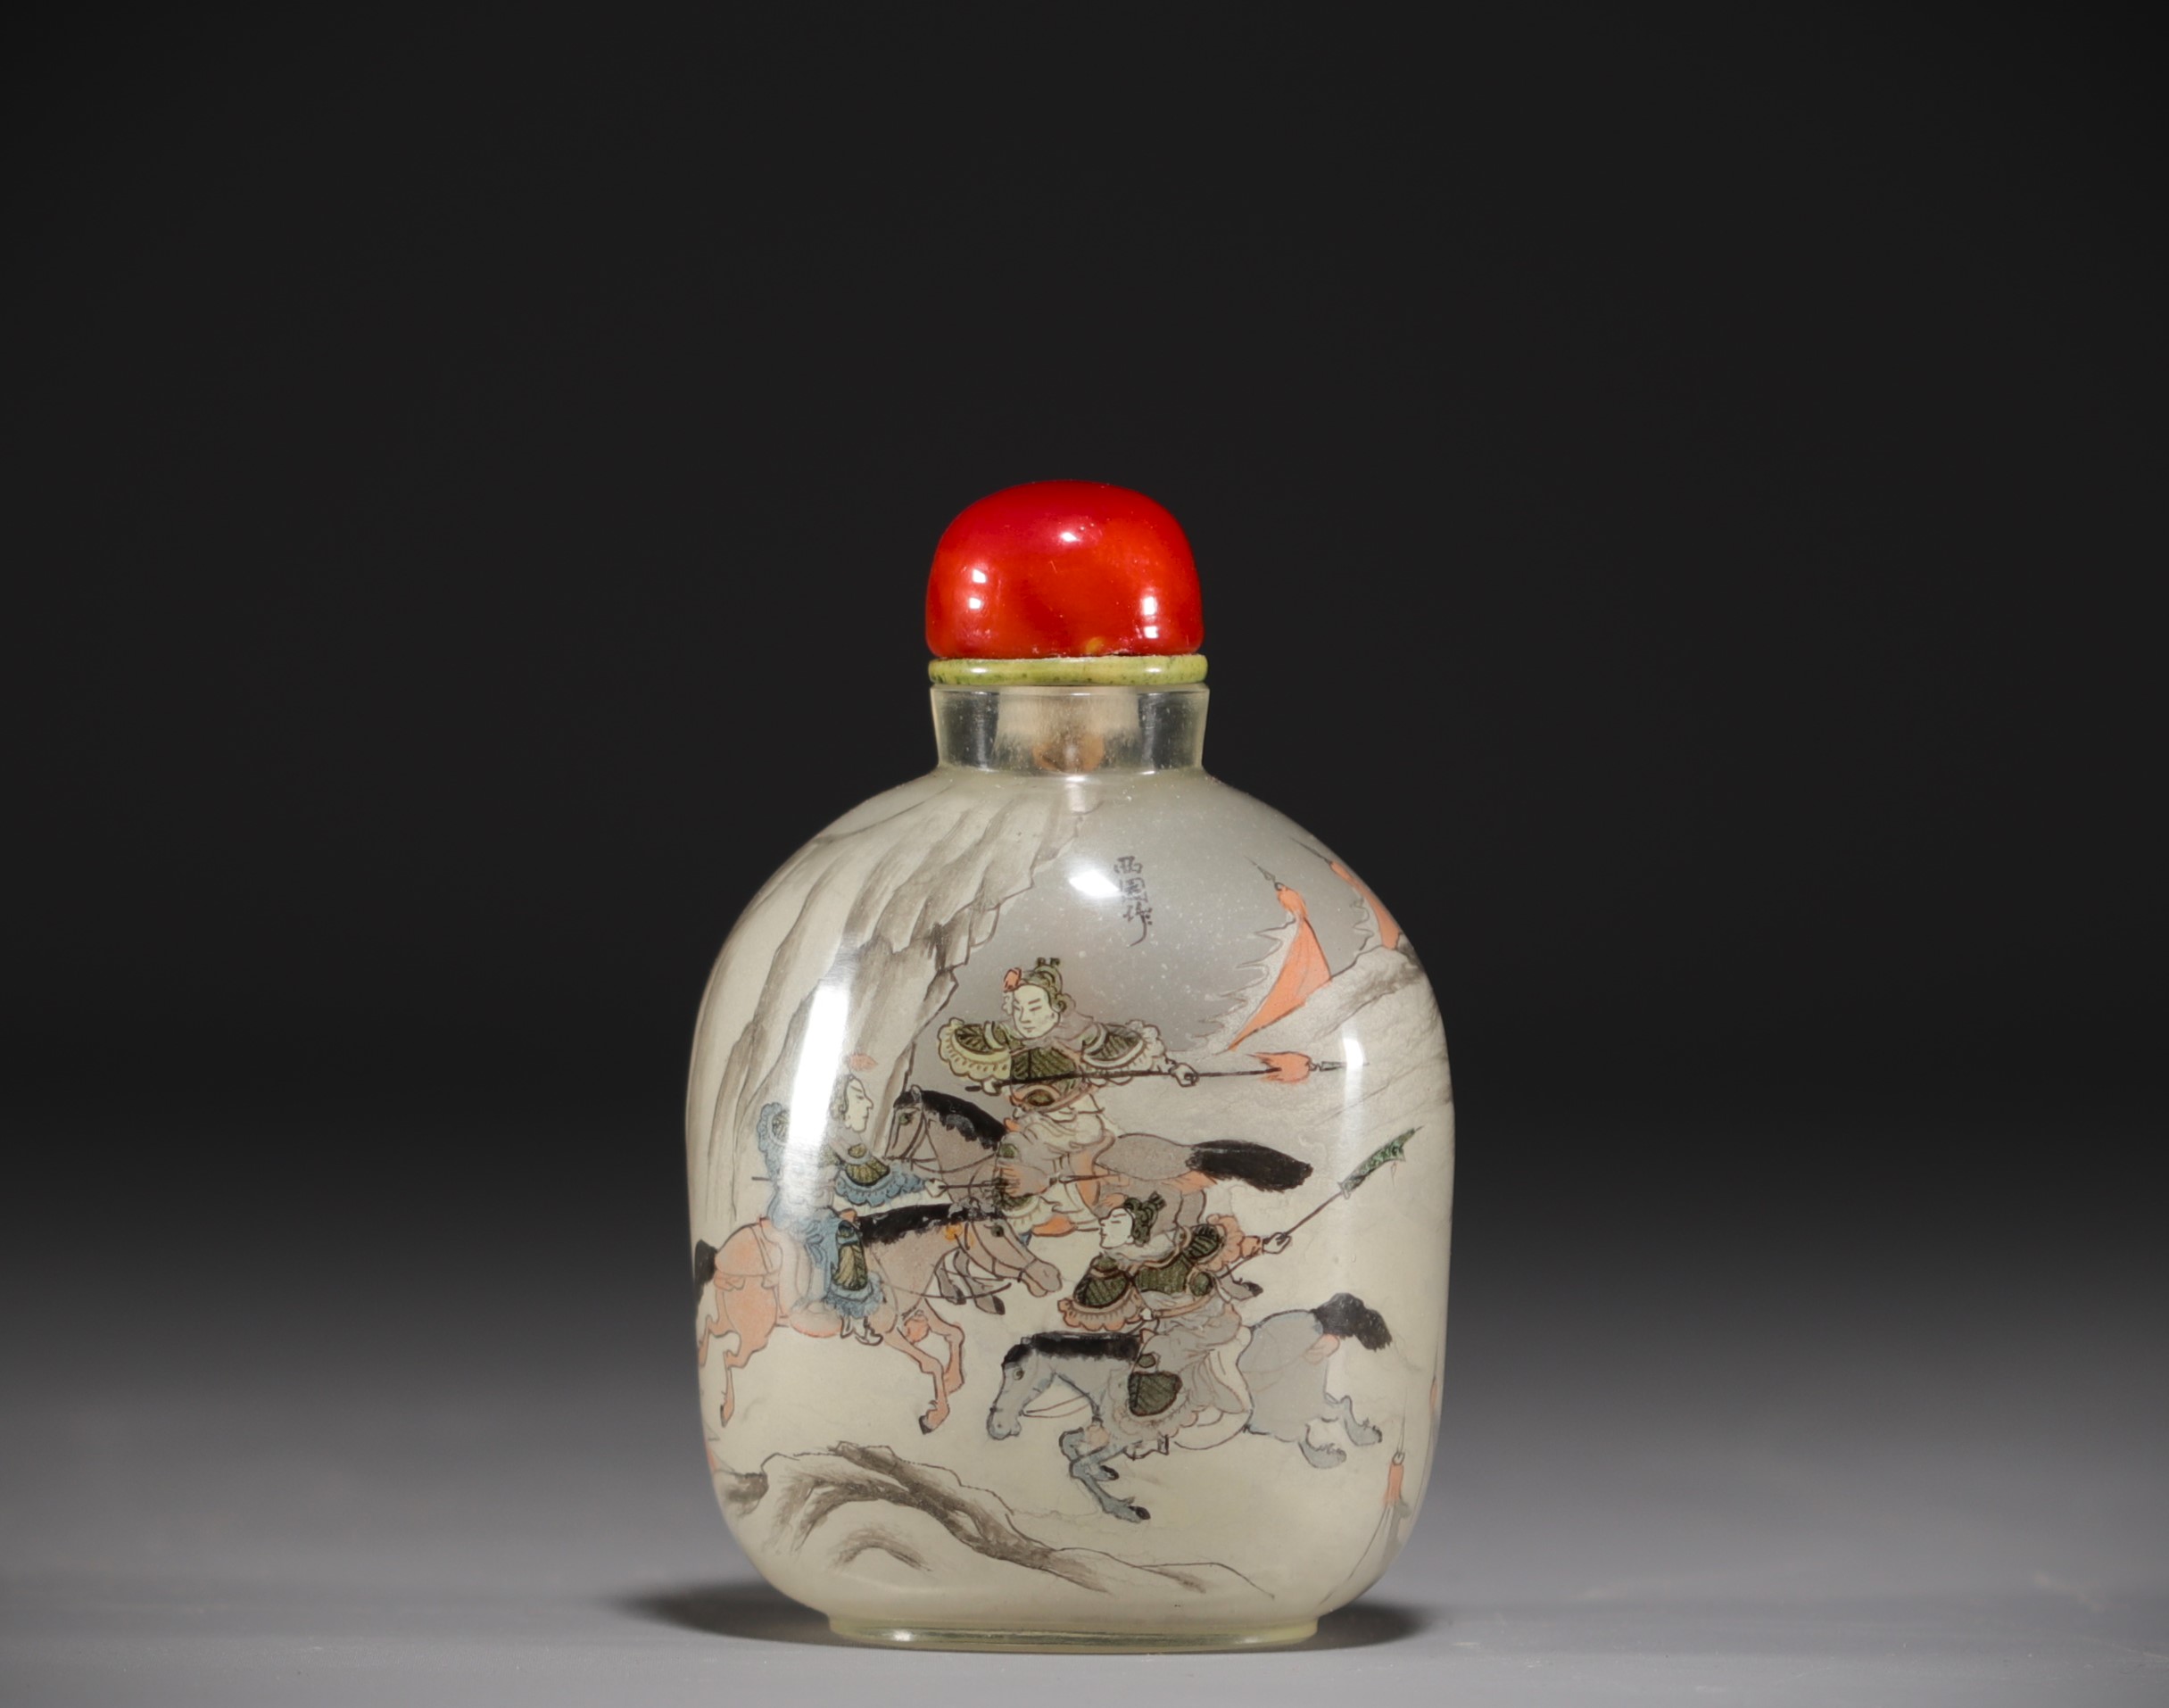 China - Glass snuffbox painted on the inside depicting a combat scene on horseback, early 20th centu